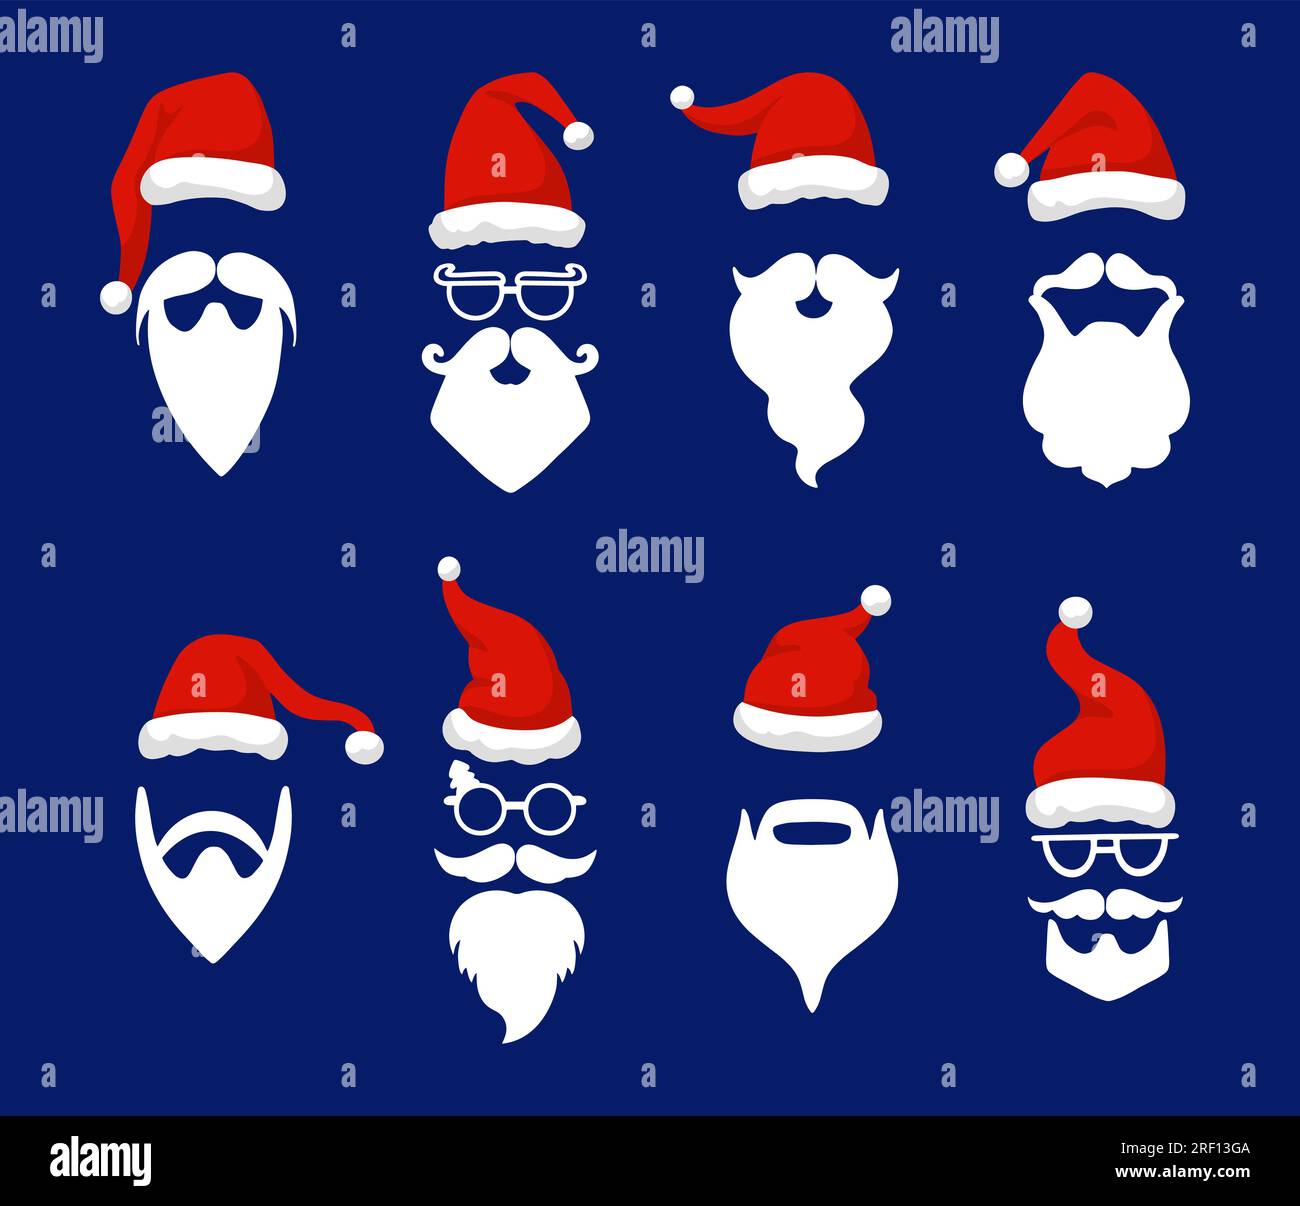 Santa hats with white moustache and beards. Cartoon objects, claus beard avatars. Laughing christmas design, new year neoteric vector masks Stock Vector